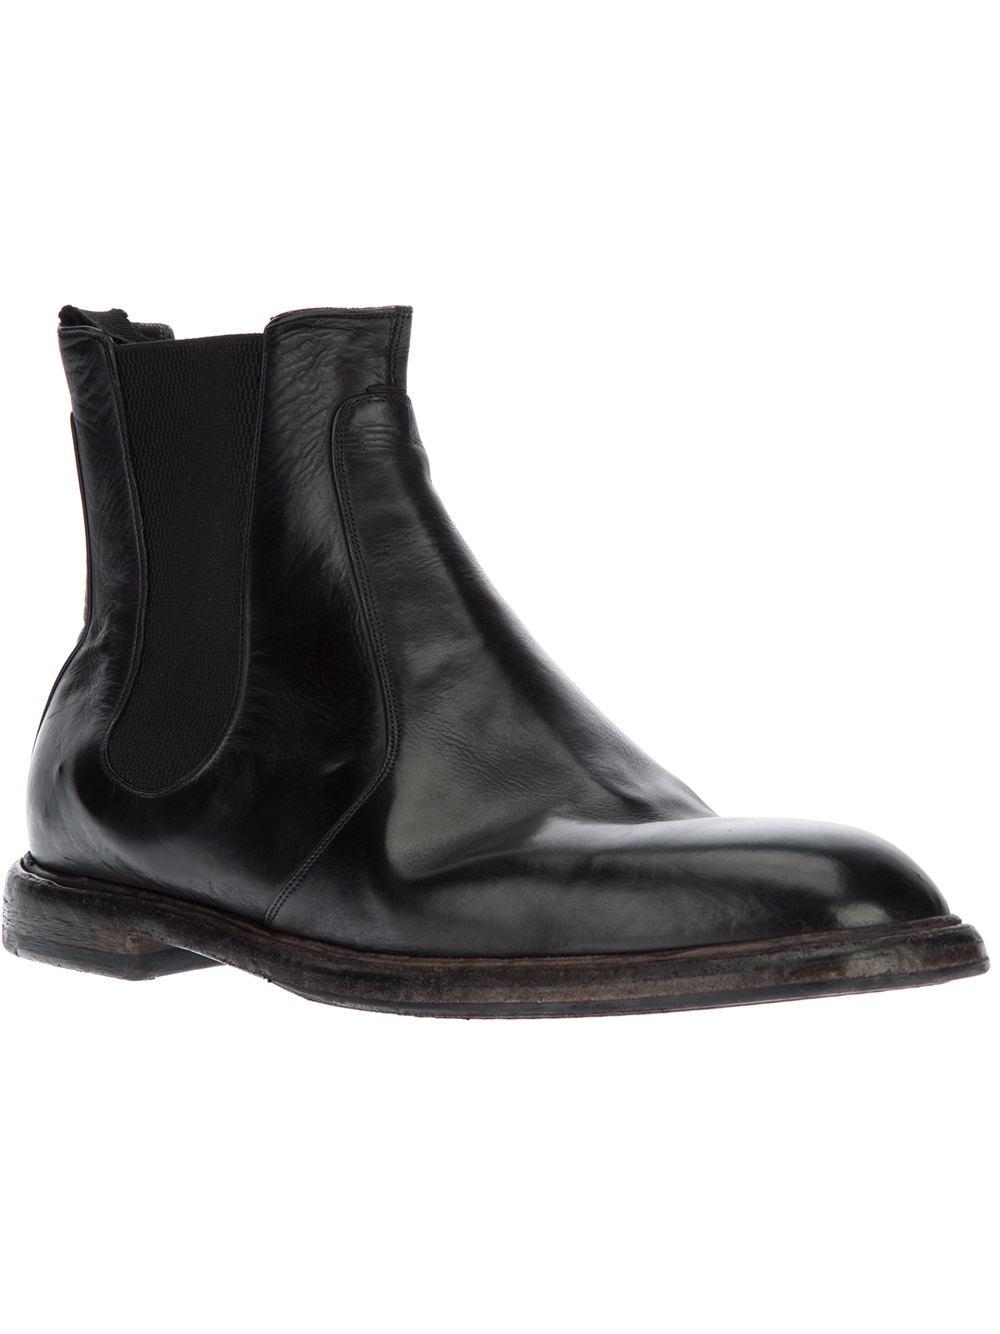 Dolce & Gabbana Ankle Boot in Black for Men | Lyst